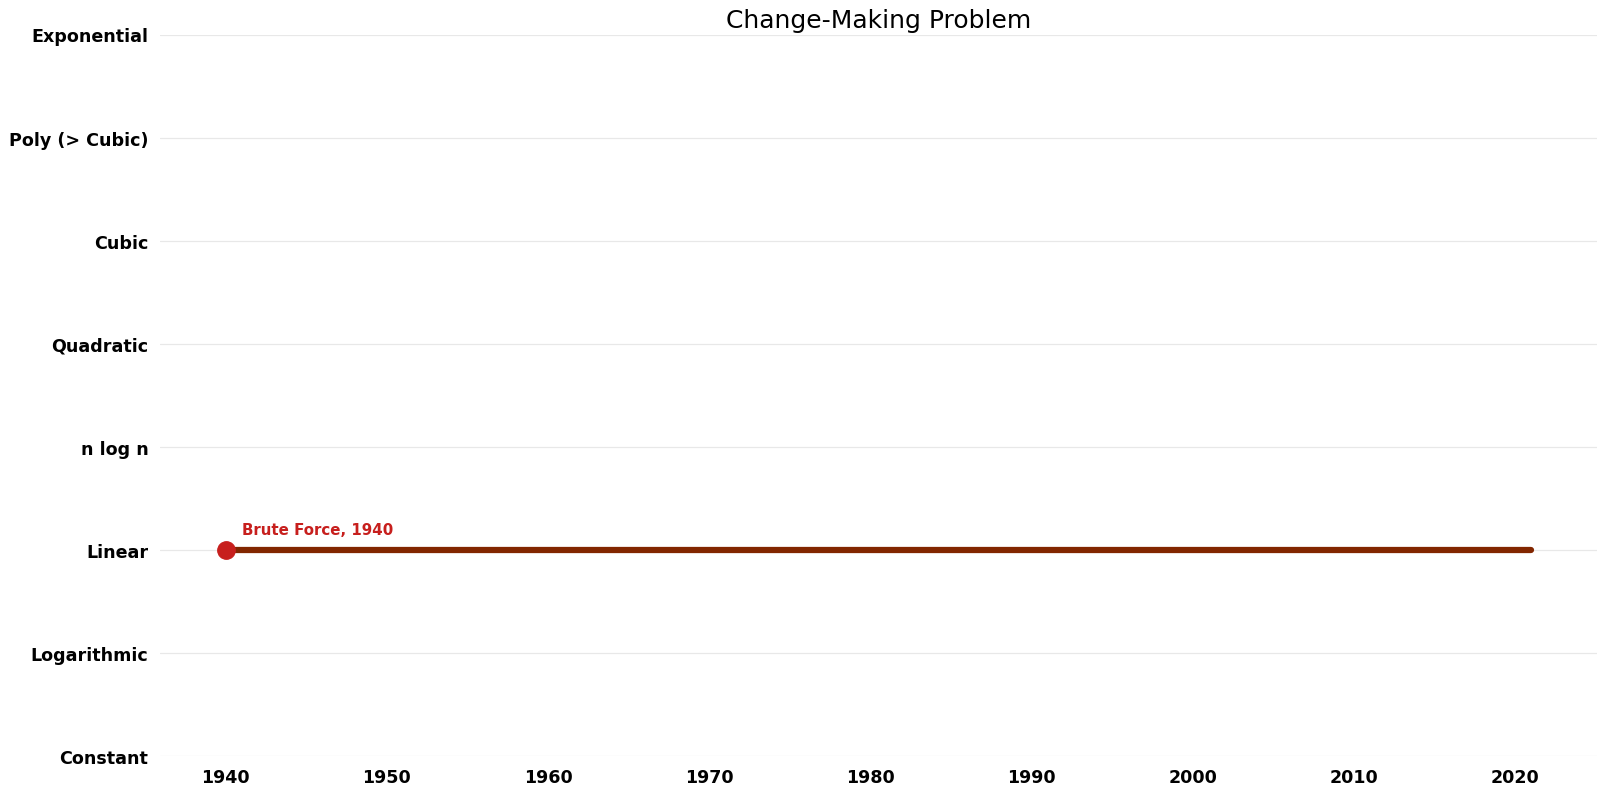 File:Change-Making Problem - Space.png